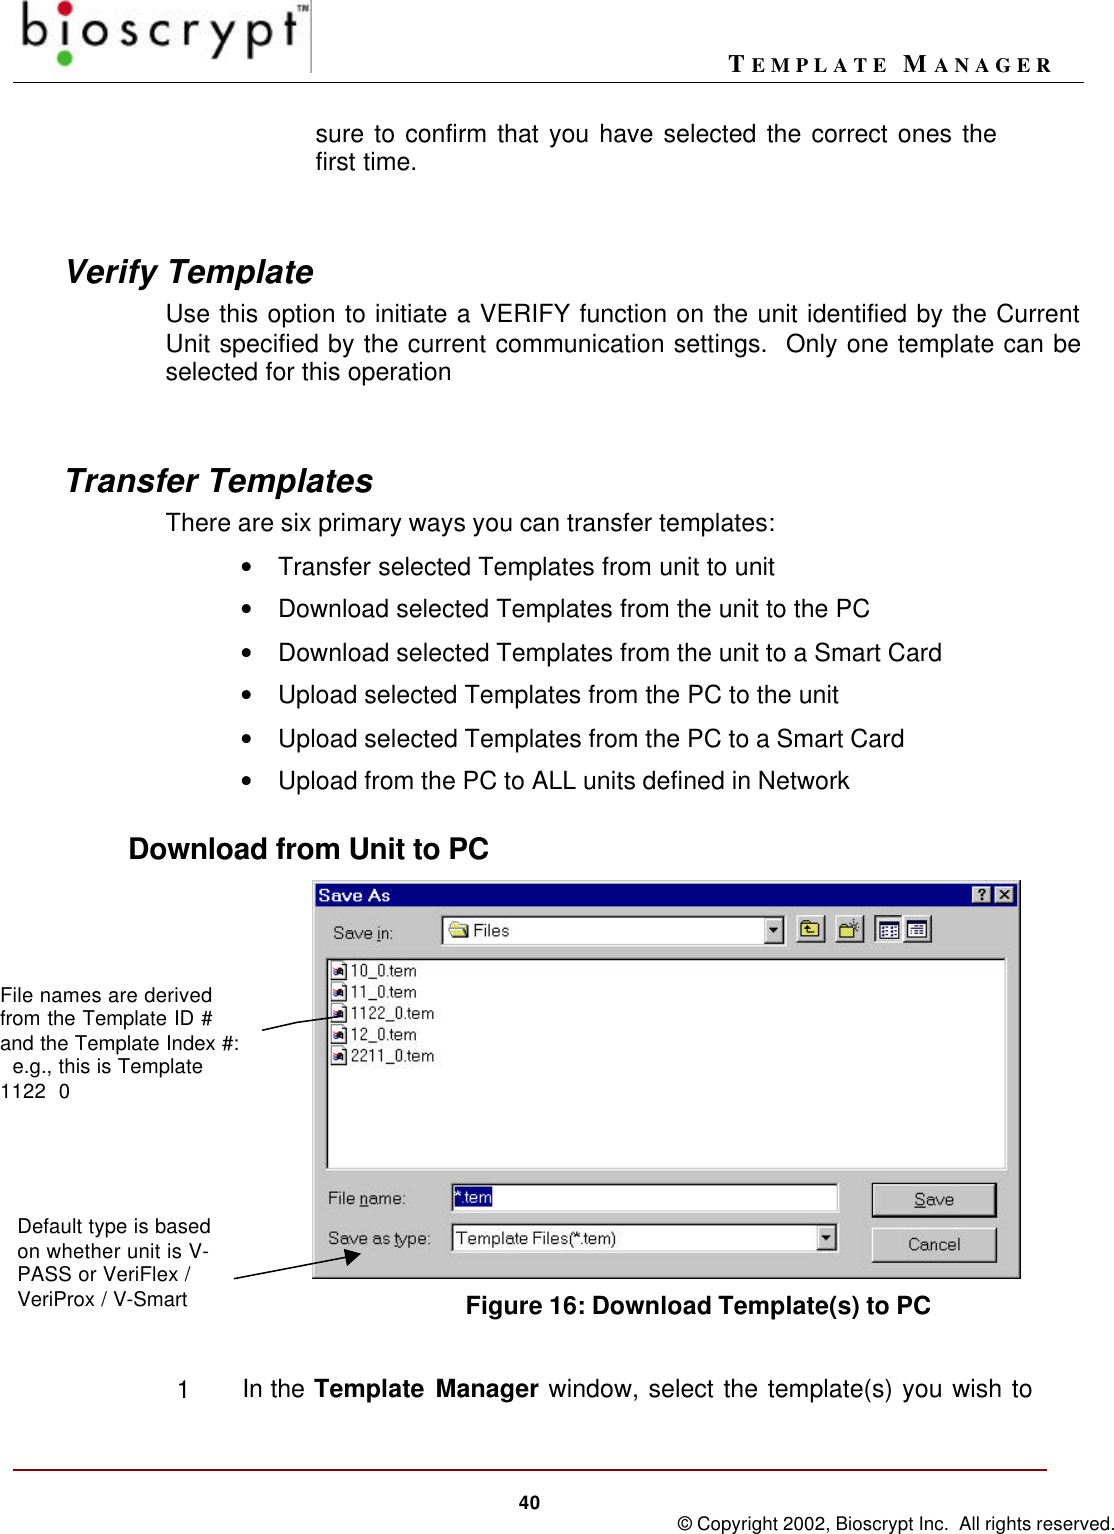 TEMPLATE MANAGER40 © Copyright 2002, Bioscrypt Inc.  All rights reserved.sure to confirm that you have selected the correct ones thefirst time.Verify TemplateUse this option to initiate a VERIFY function on the unit identified by the CurrentUnit specified by the current communication settings.  Only one template can beselected for this operationTransfer TemplatesThere are six primary ways you can transfer templates:• Transfer selected Templates from unit to unit• Download selected Templates from the unit to the PC• Download selected Templates from the unit to a Smart Card• Upload selected Templates from the PC to the unit• Upload selected Templates from the PC to a Smart Card• Upload from the PC to ALL units defined in NetworkDownload from Unit to PCFigure 16: Download Template(s) to PC1In the Template Manager window, select the template(s) you wish toFile names are derivedfrom the Template ID #and the Template Index #:  e.g., this is Template1122  0Default type is basedon whether unit is V-PASS or VeriFlex /VeriProx / V-Smart